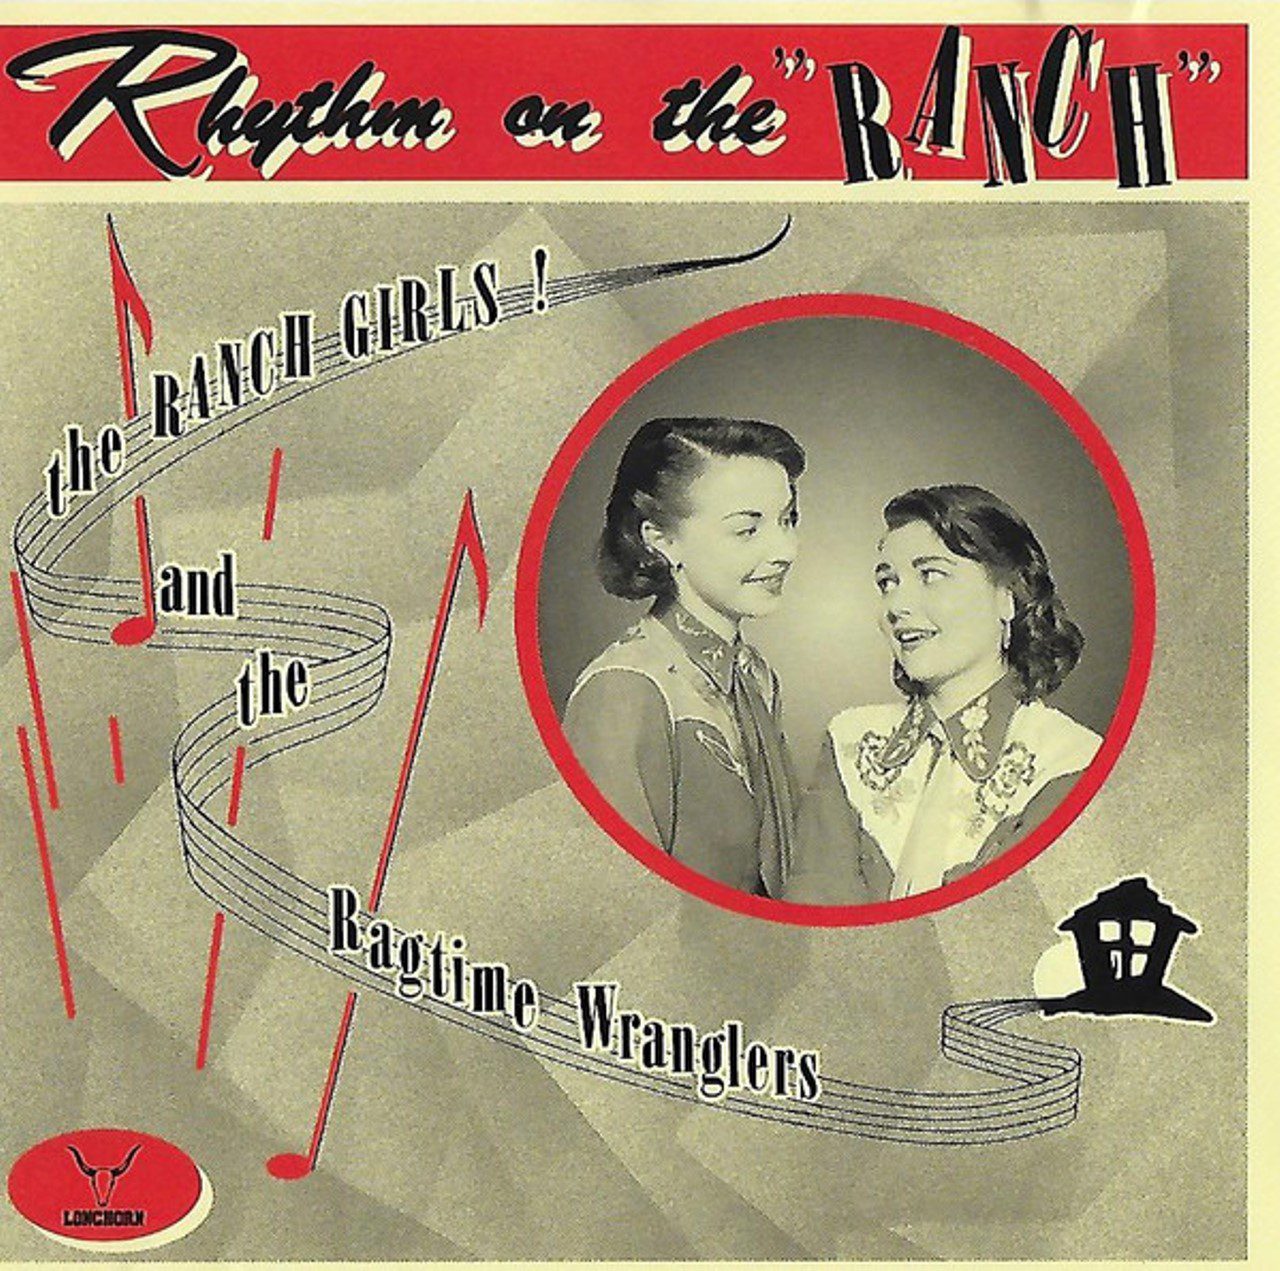 Ranch Girls & The Ragtime Wranglers - Rhythm On The Ranch cover album